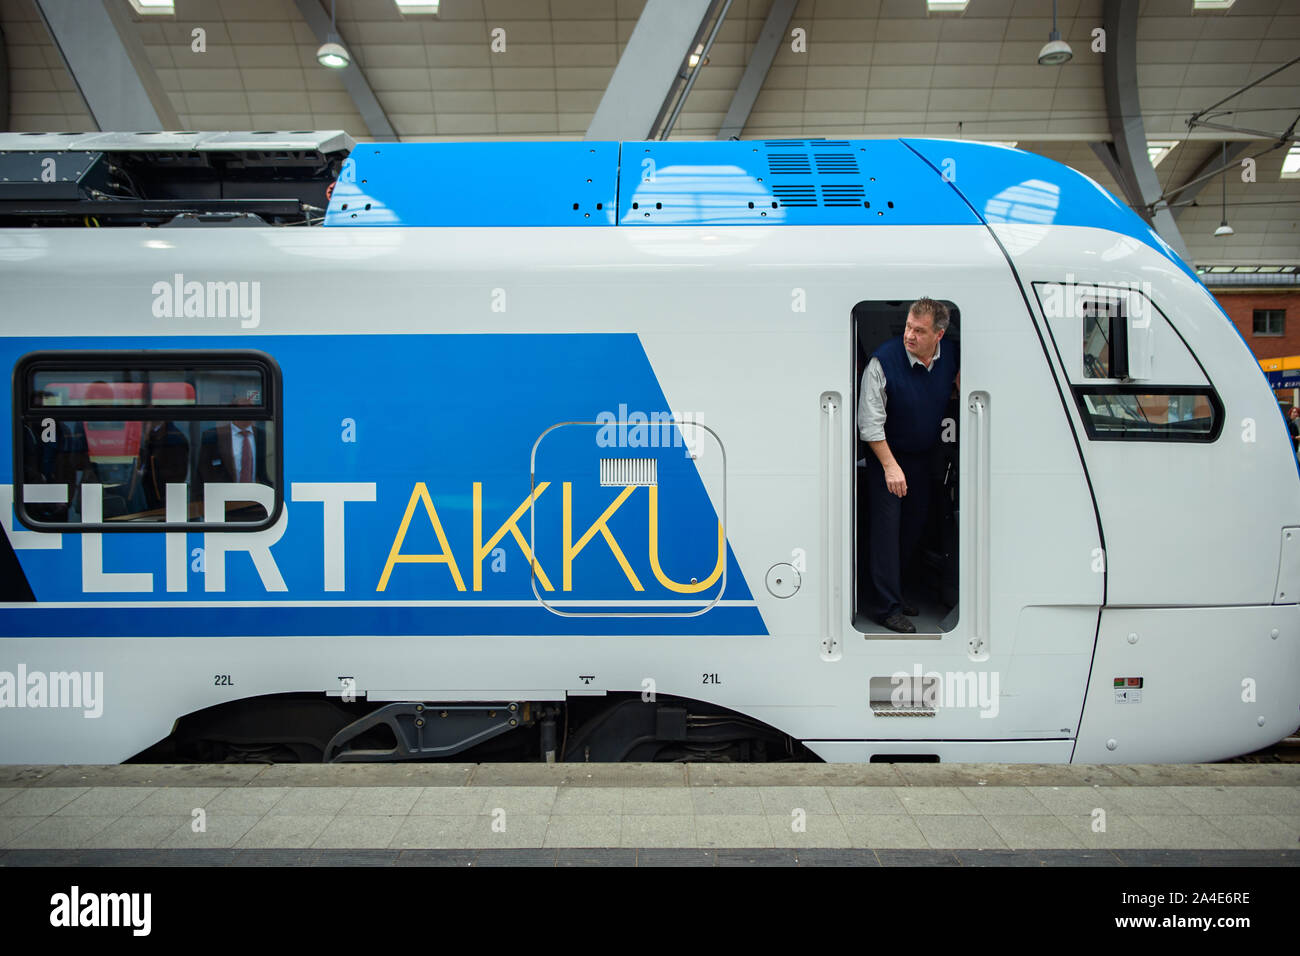 Kiel, Germany. 14th Oct, 2019. The locomotive driver Michael Rusche is standing in the driver's cab of a 'FLIRT Akku' test train of Stadler Pankow GmbH at Kiel main station. Stadler and the Schleswig-Holstein public transport association have signed a supply contract for 55 battery-powered railcars. The first battery multiple units are to be deployed in the northern and eastern networks of Schleswig-Holstein at the end of 2022. Credit: dpa picture alliance/Alamy Live News Stock Photo